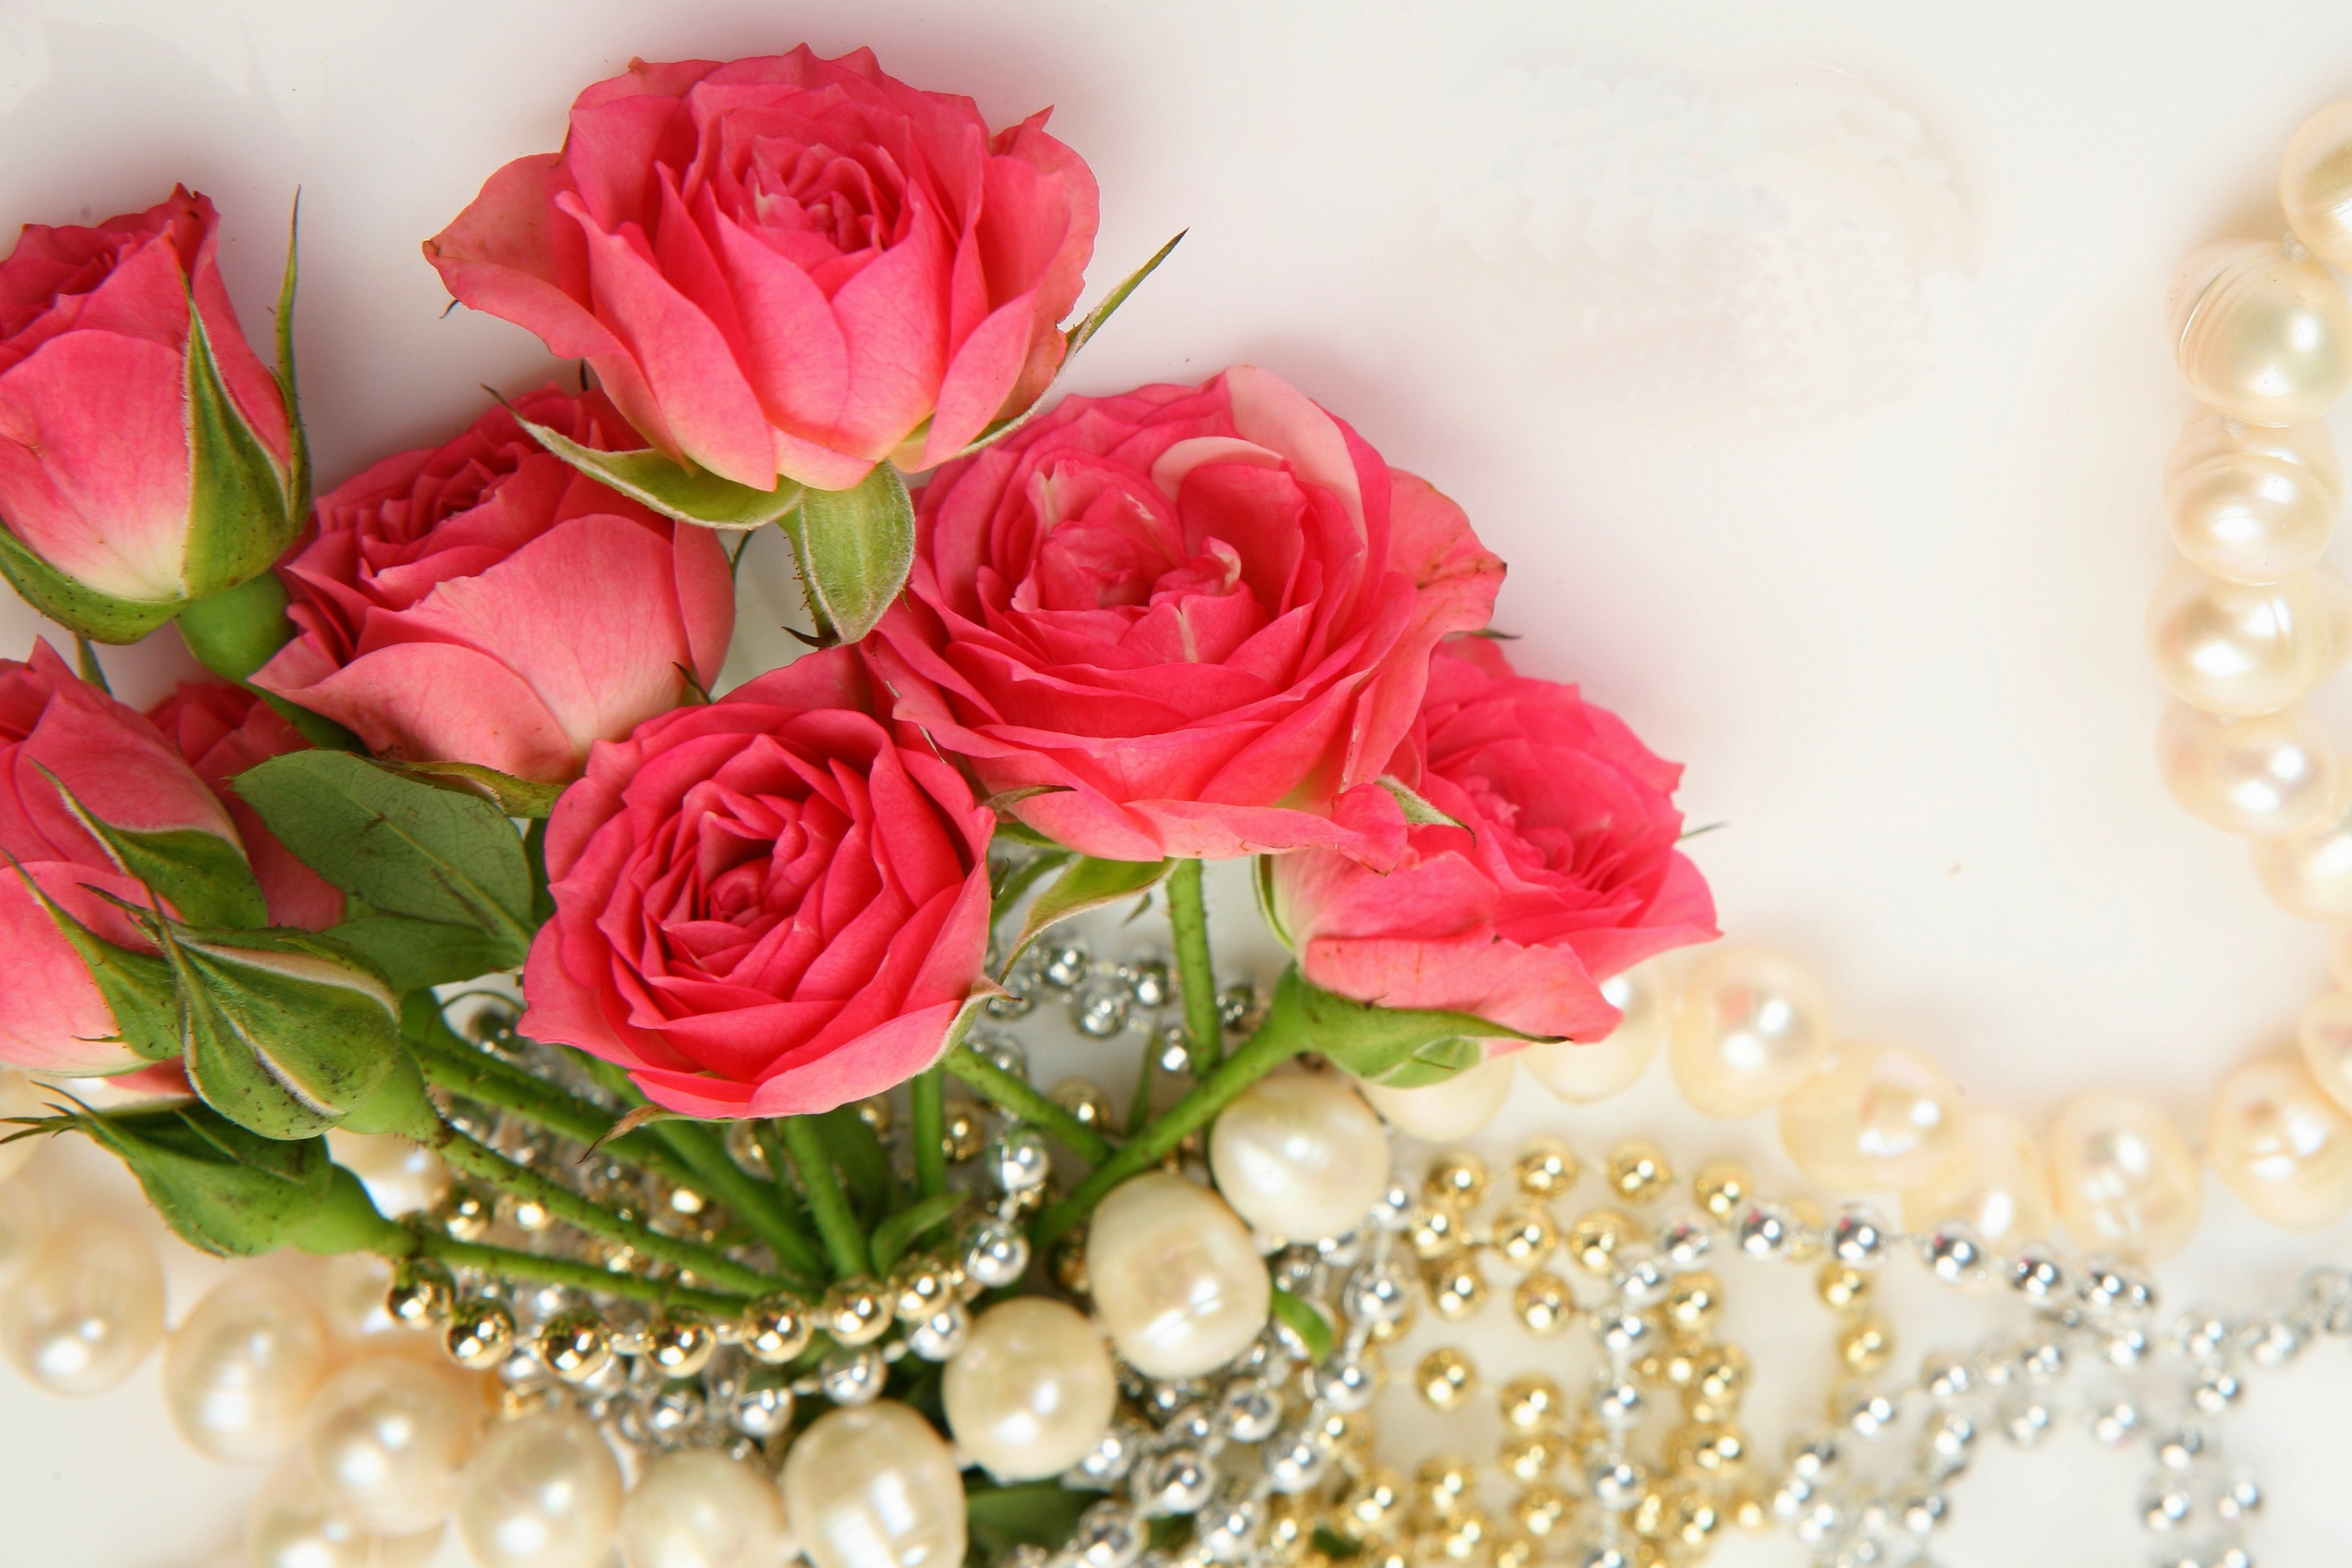 Das Necklace and Roses Bouquet Wallpaper 2880x1920